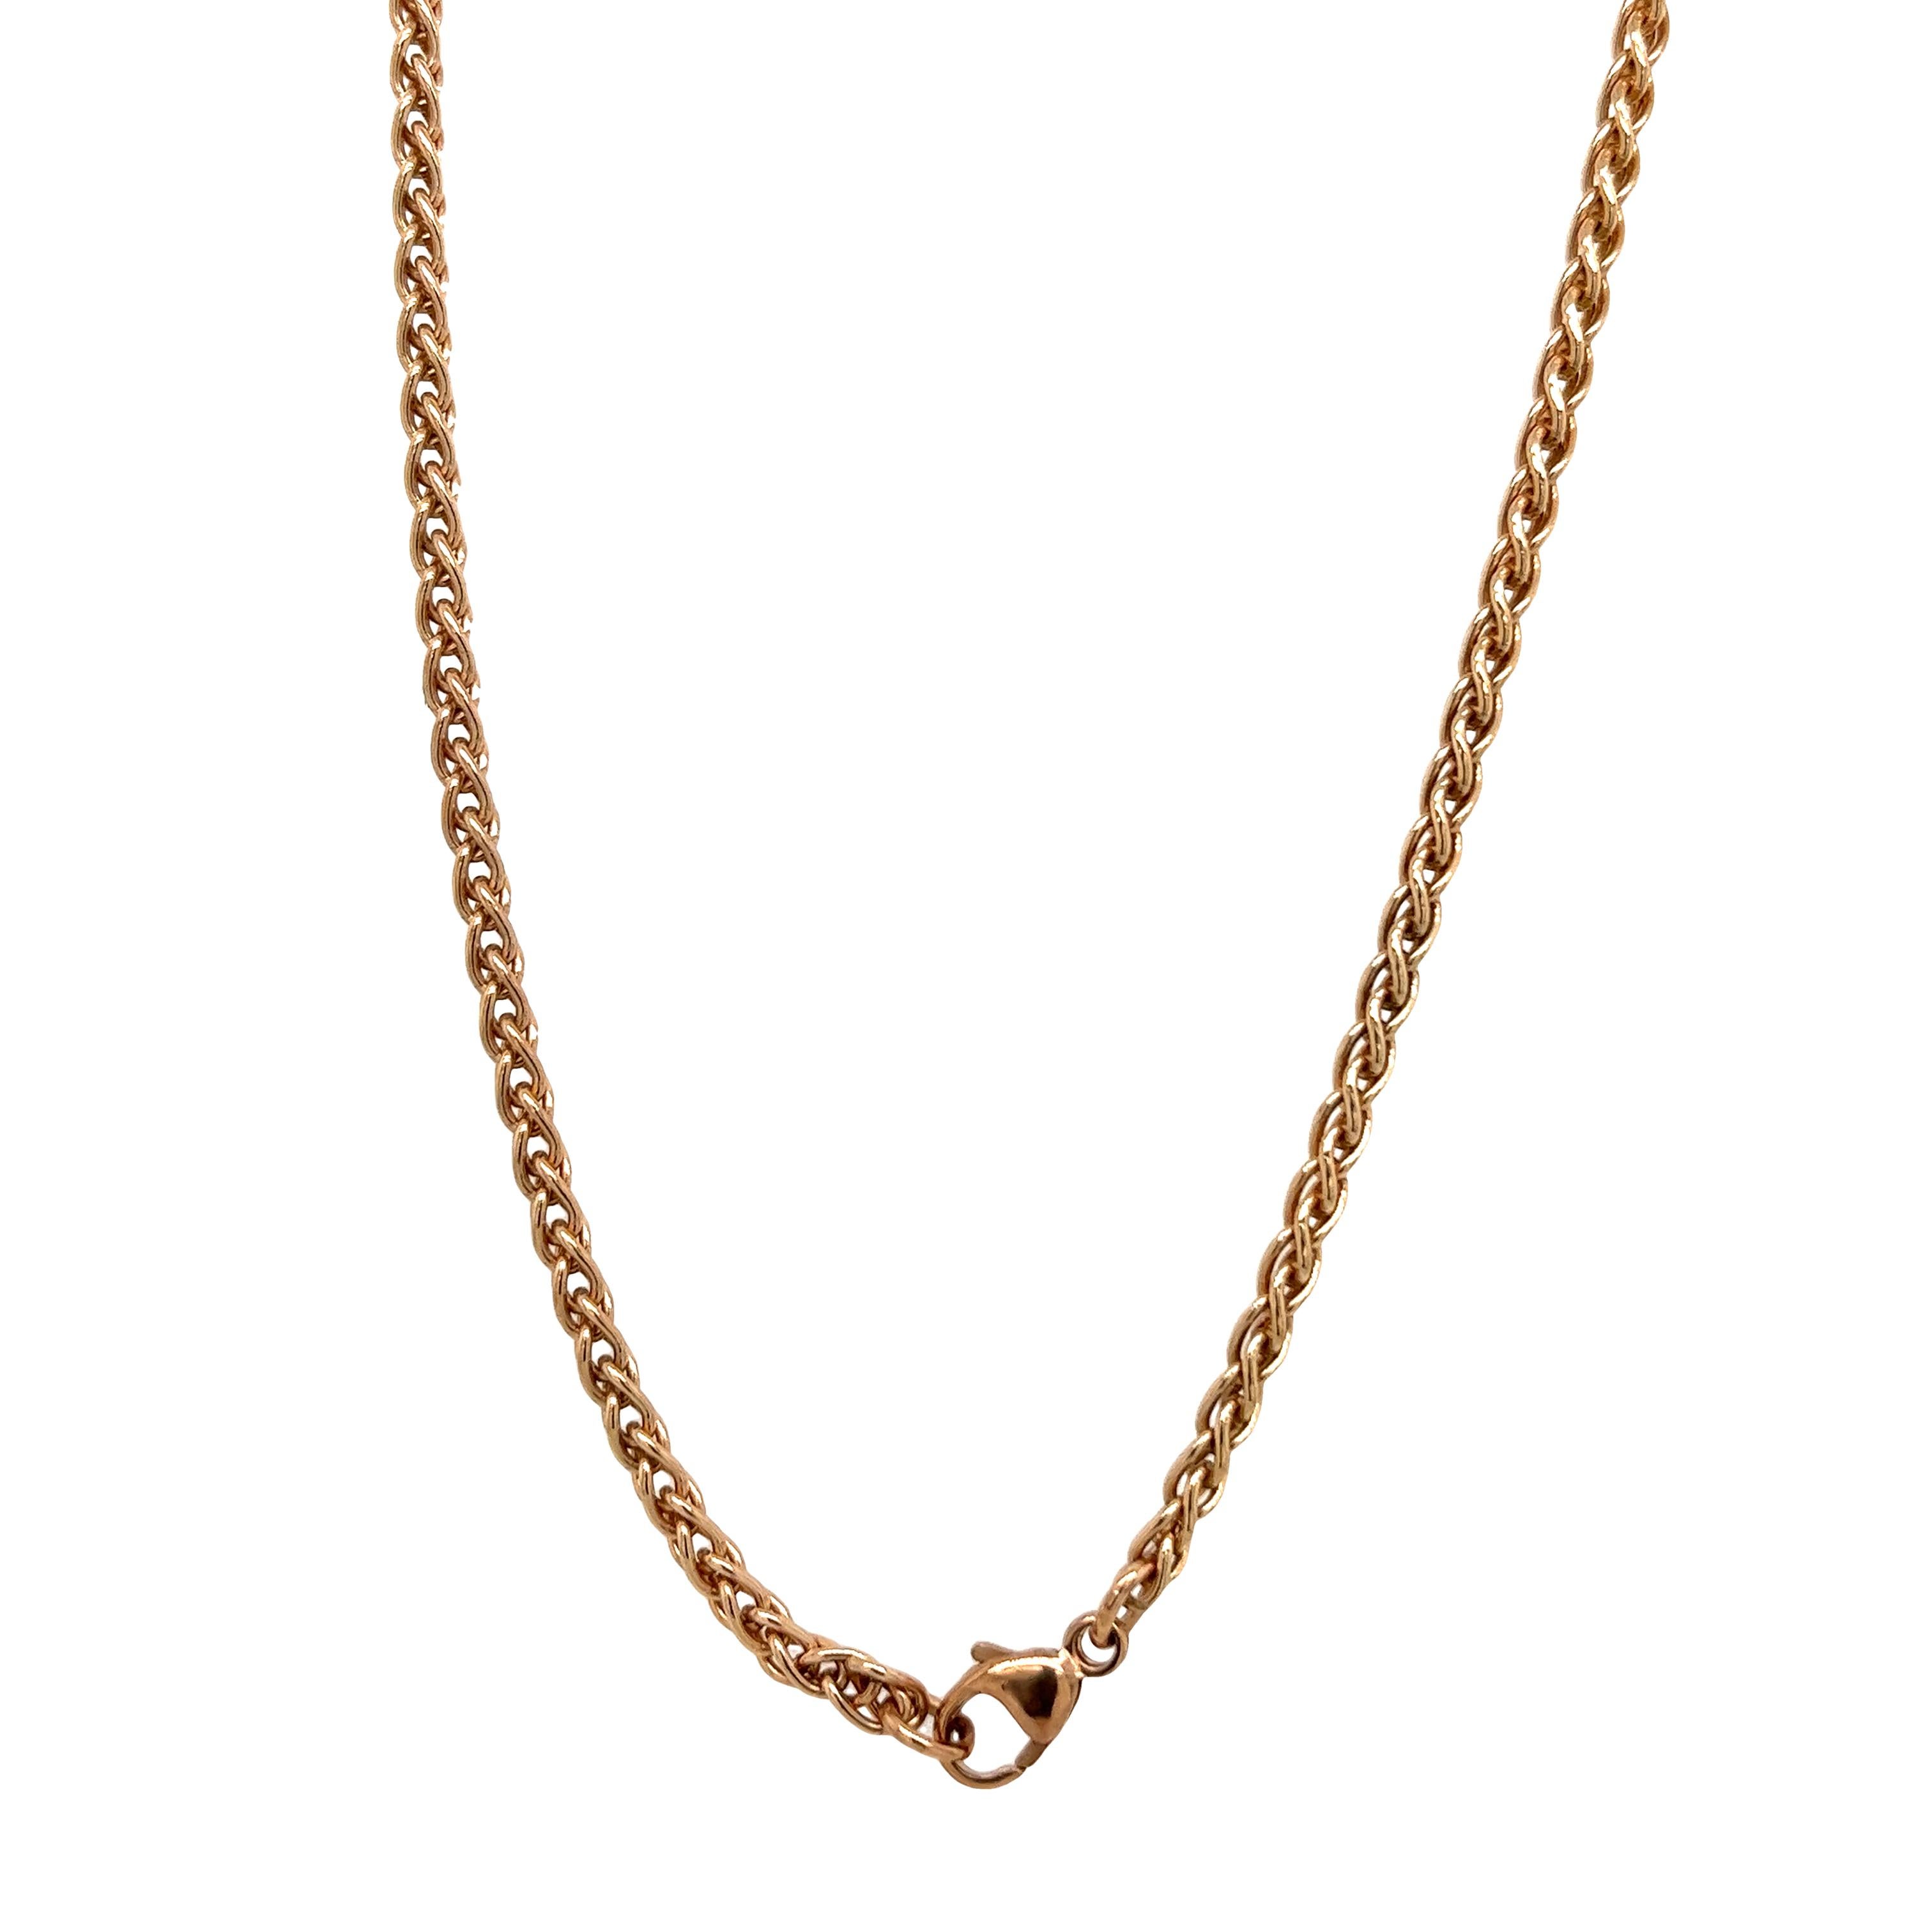 This necklace is a great choice for women or mens
who love unique and elegant jewellery,
9ct rose gold spiga chain necklace.
Length: 24'' 
Total Weight: 11.8g 
Chain Width: 2.50mm
SMS9142